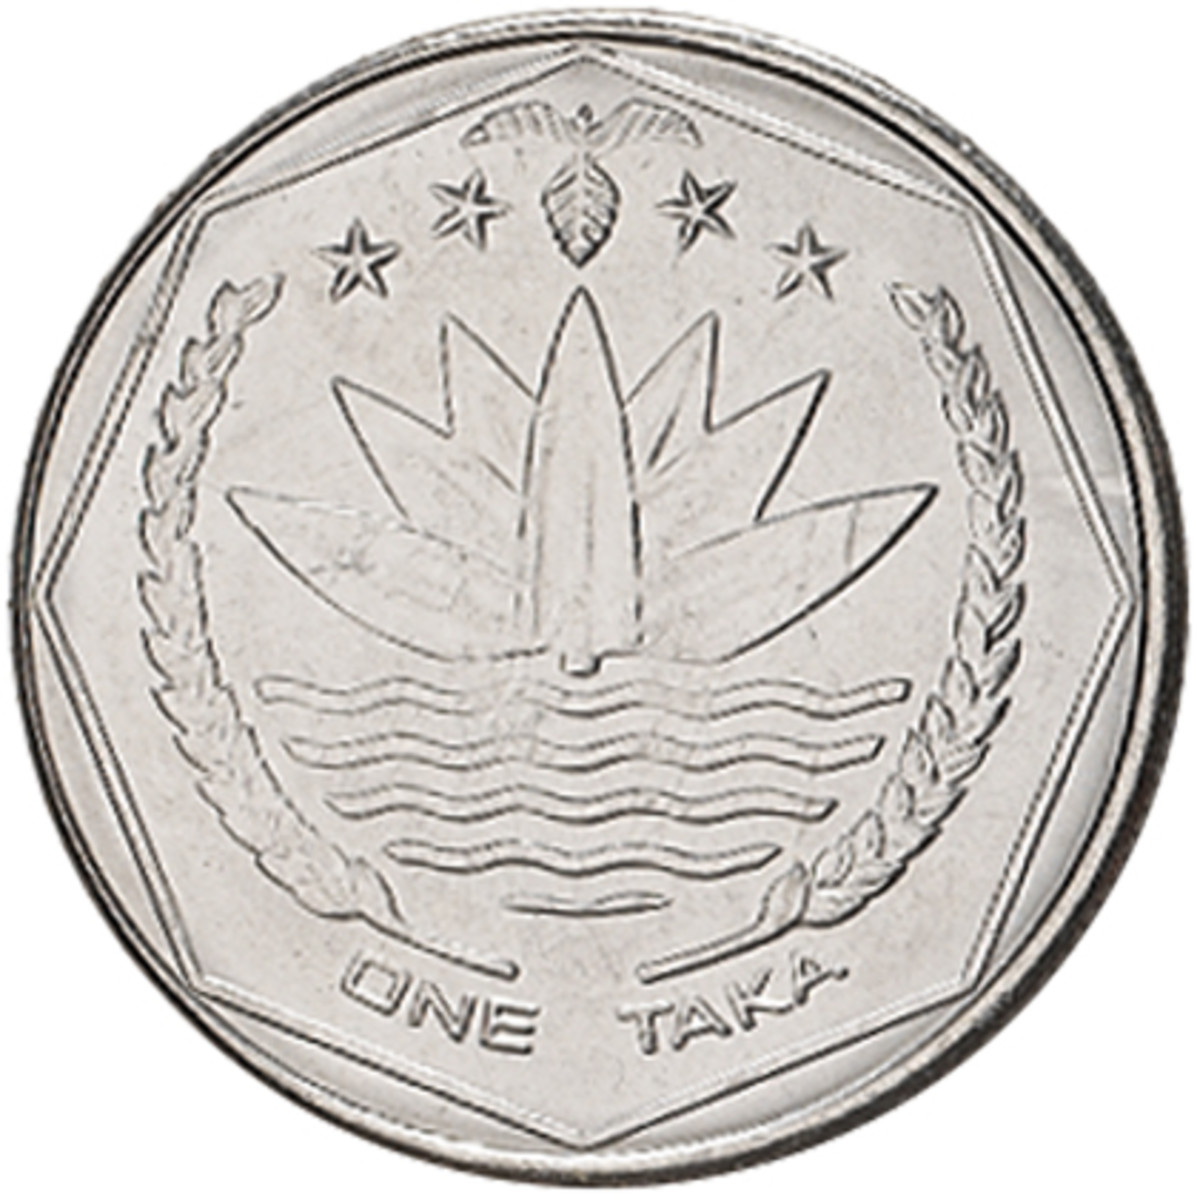 Obverse of the one taka coin.